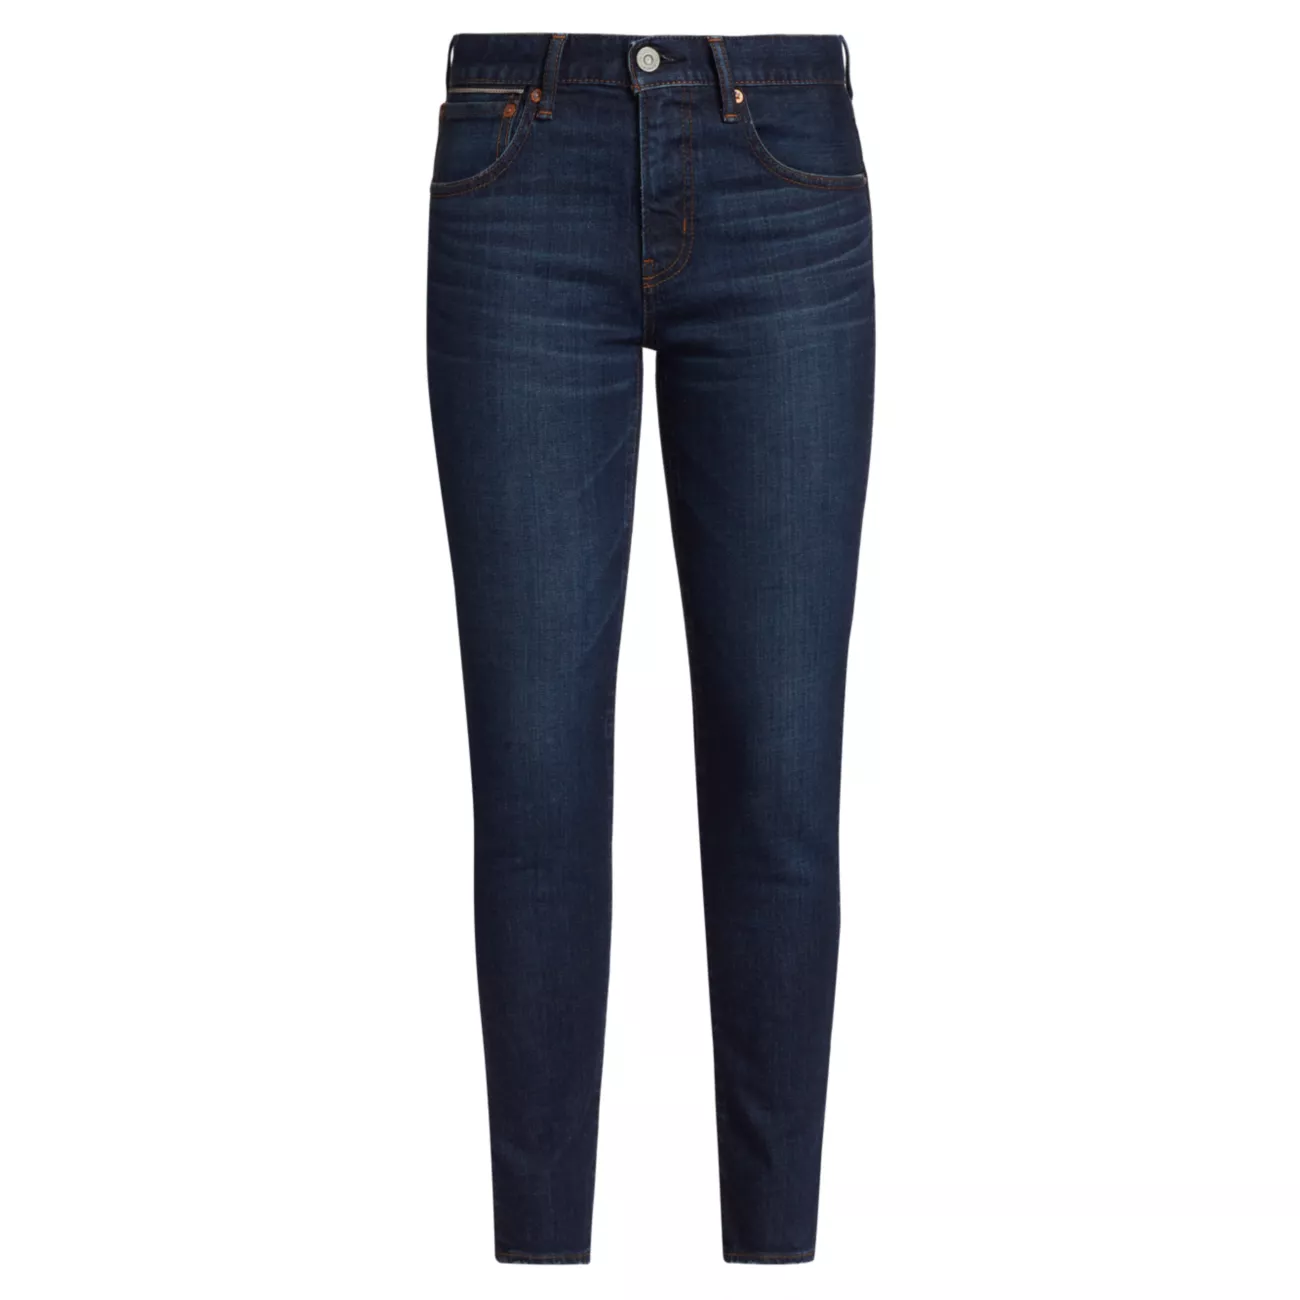 Shandon Mid-Rise Skinny Jeans Moussy Vintage